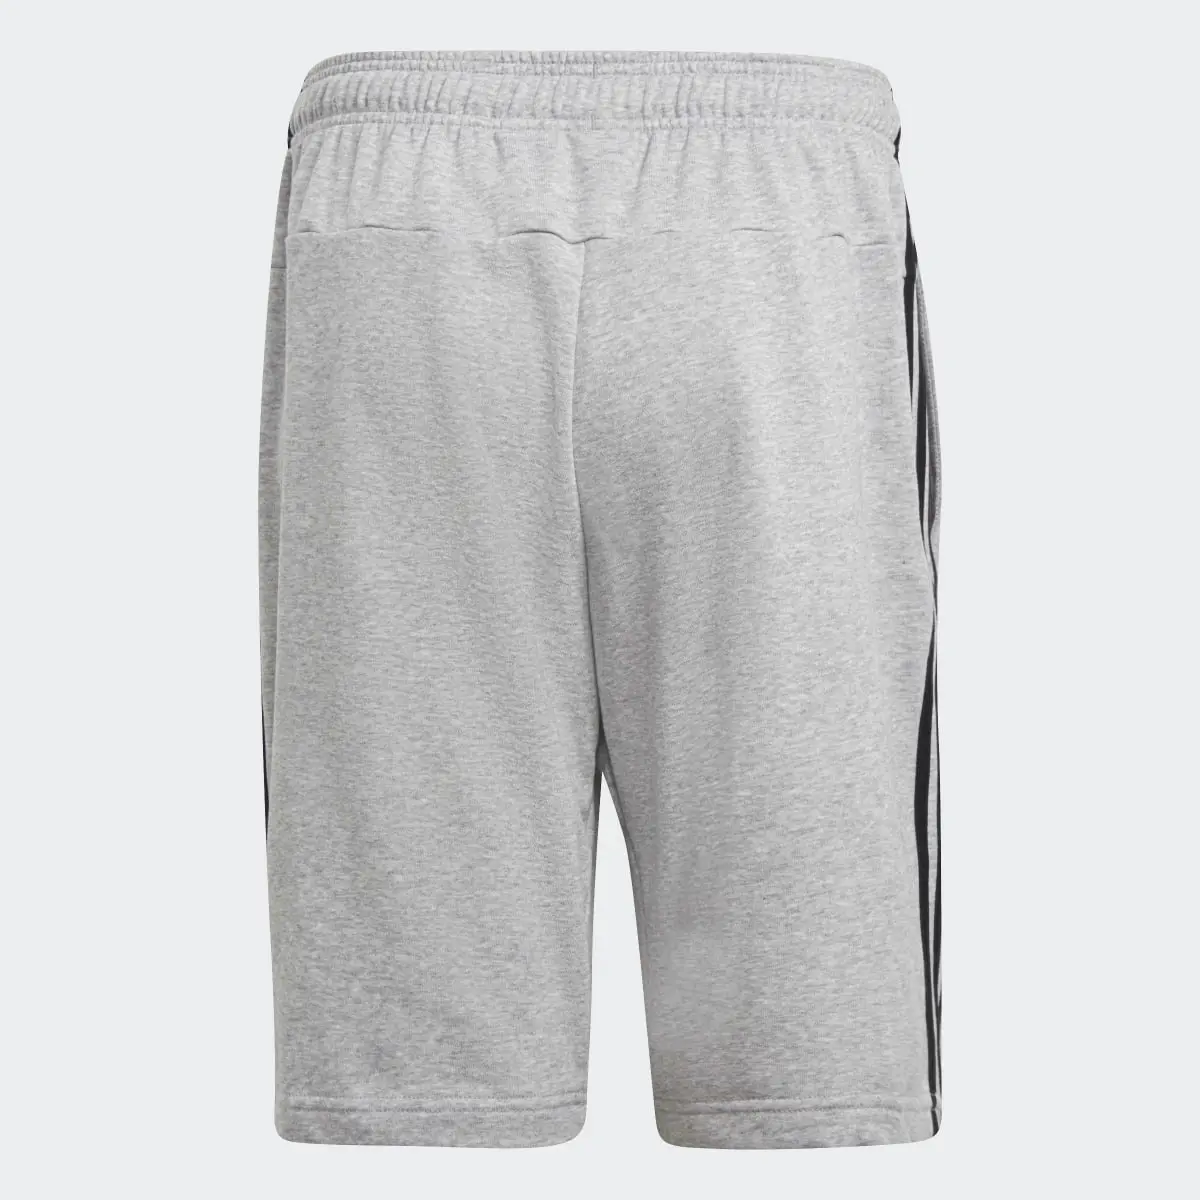 Adidas Essentials 3-Stripes French Terry Shorts. 2